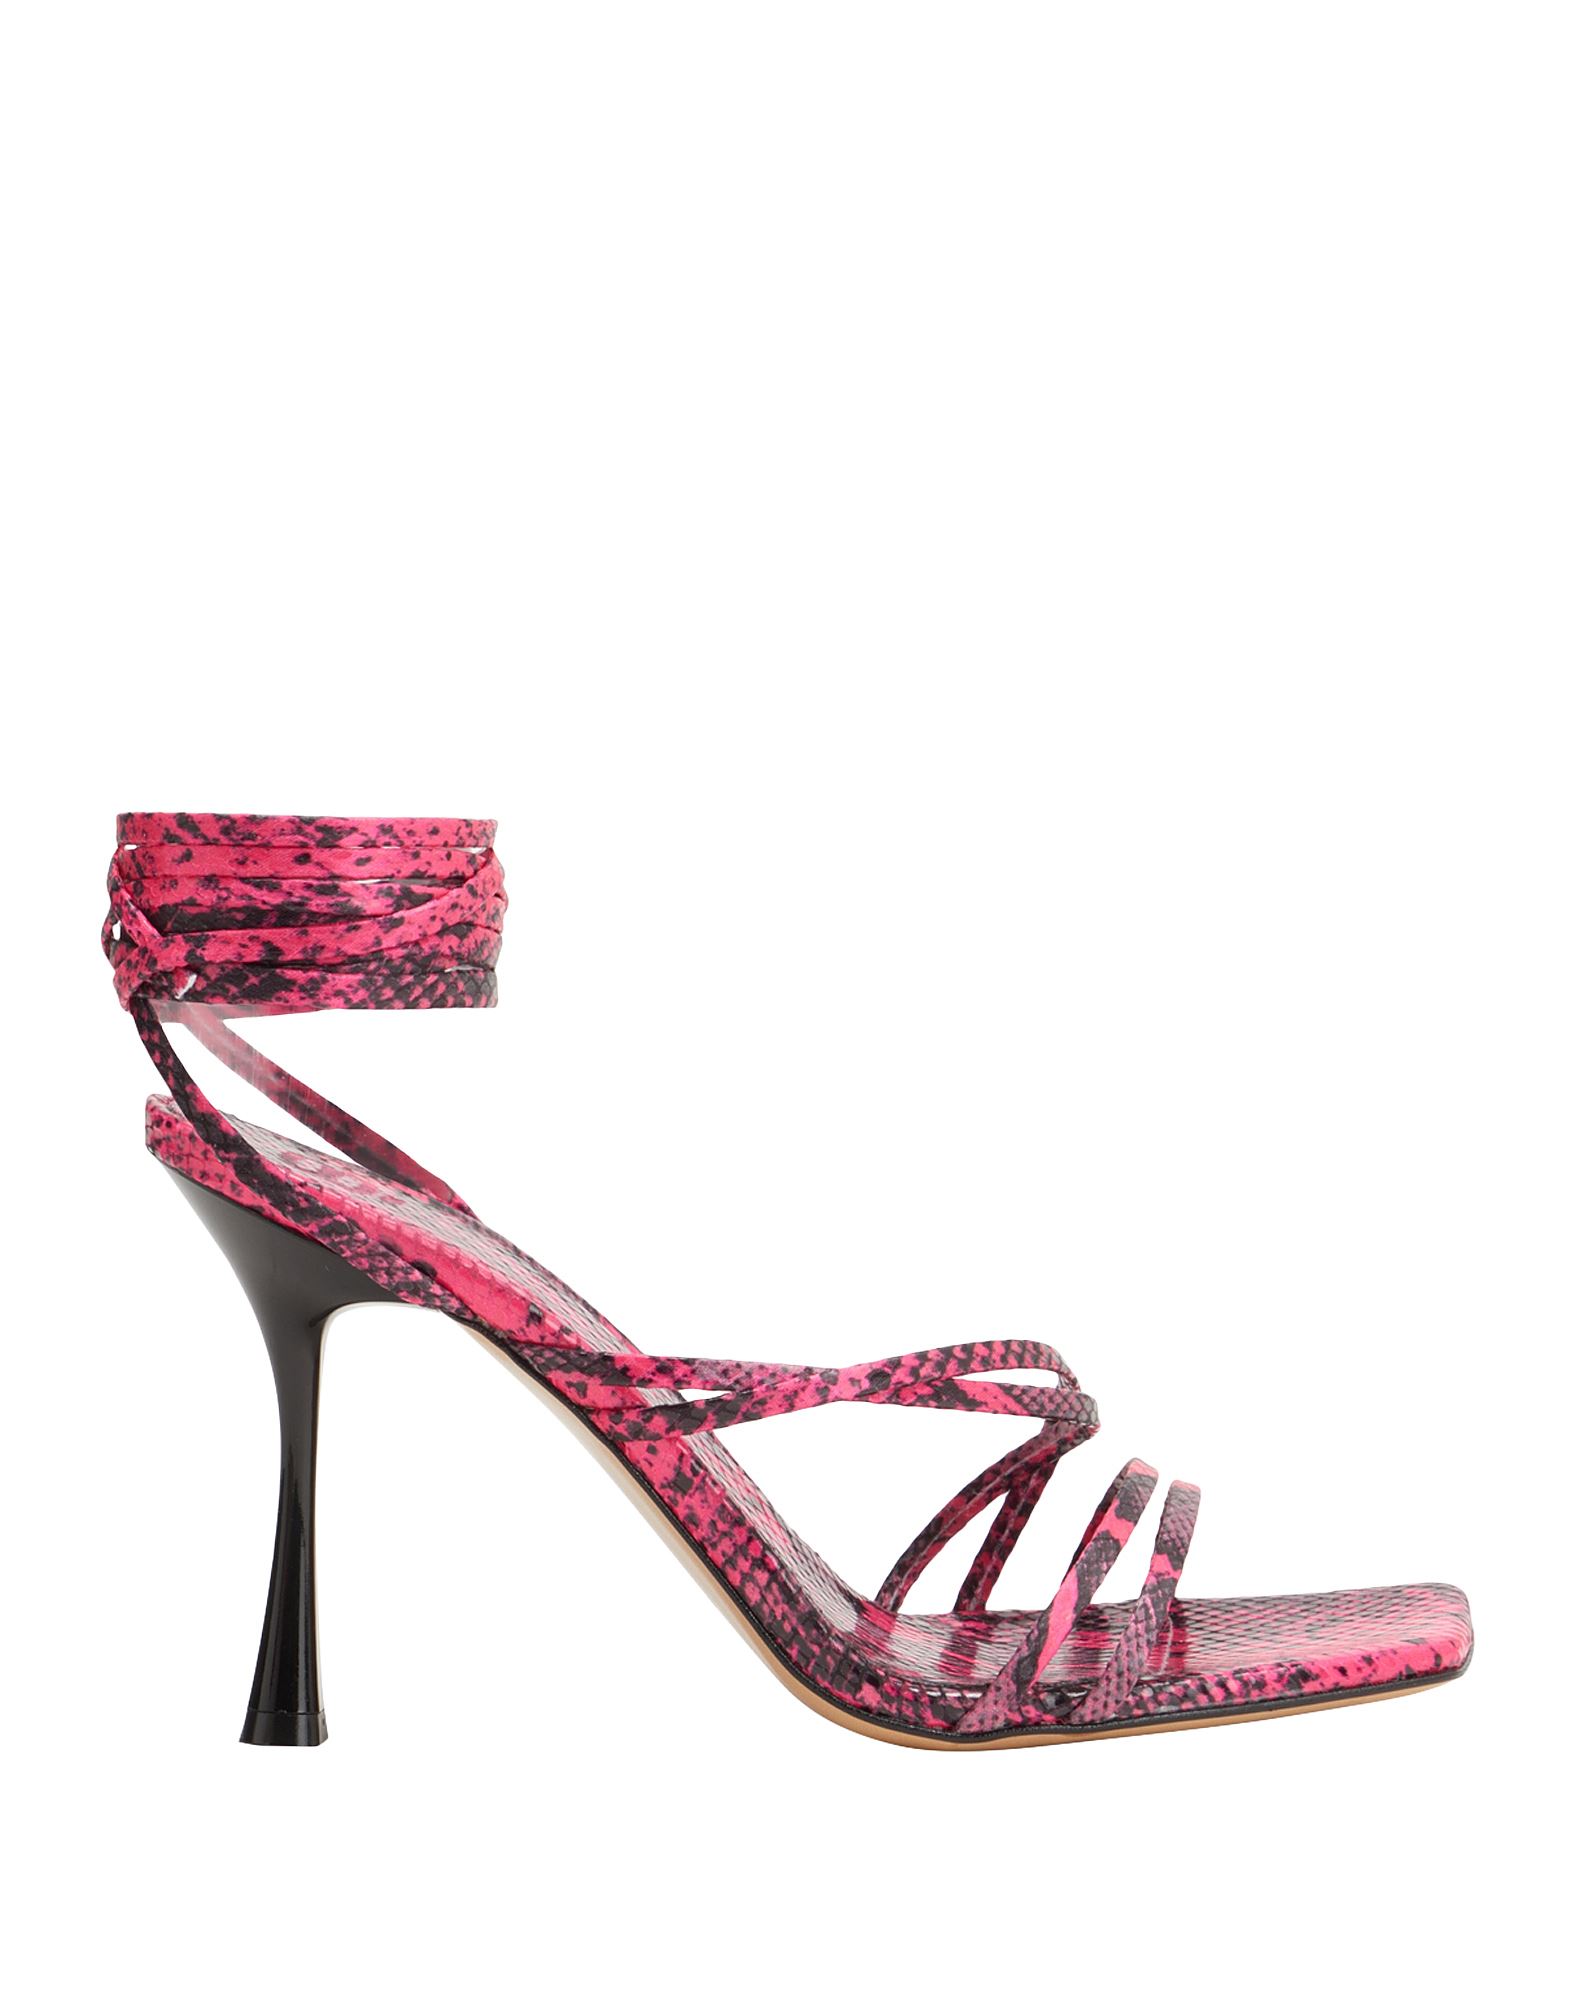 8 By Yoox Sandals In Pink